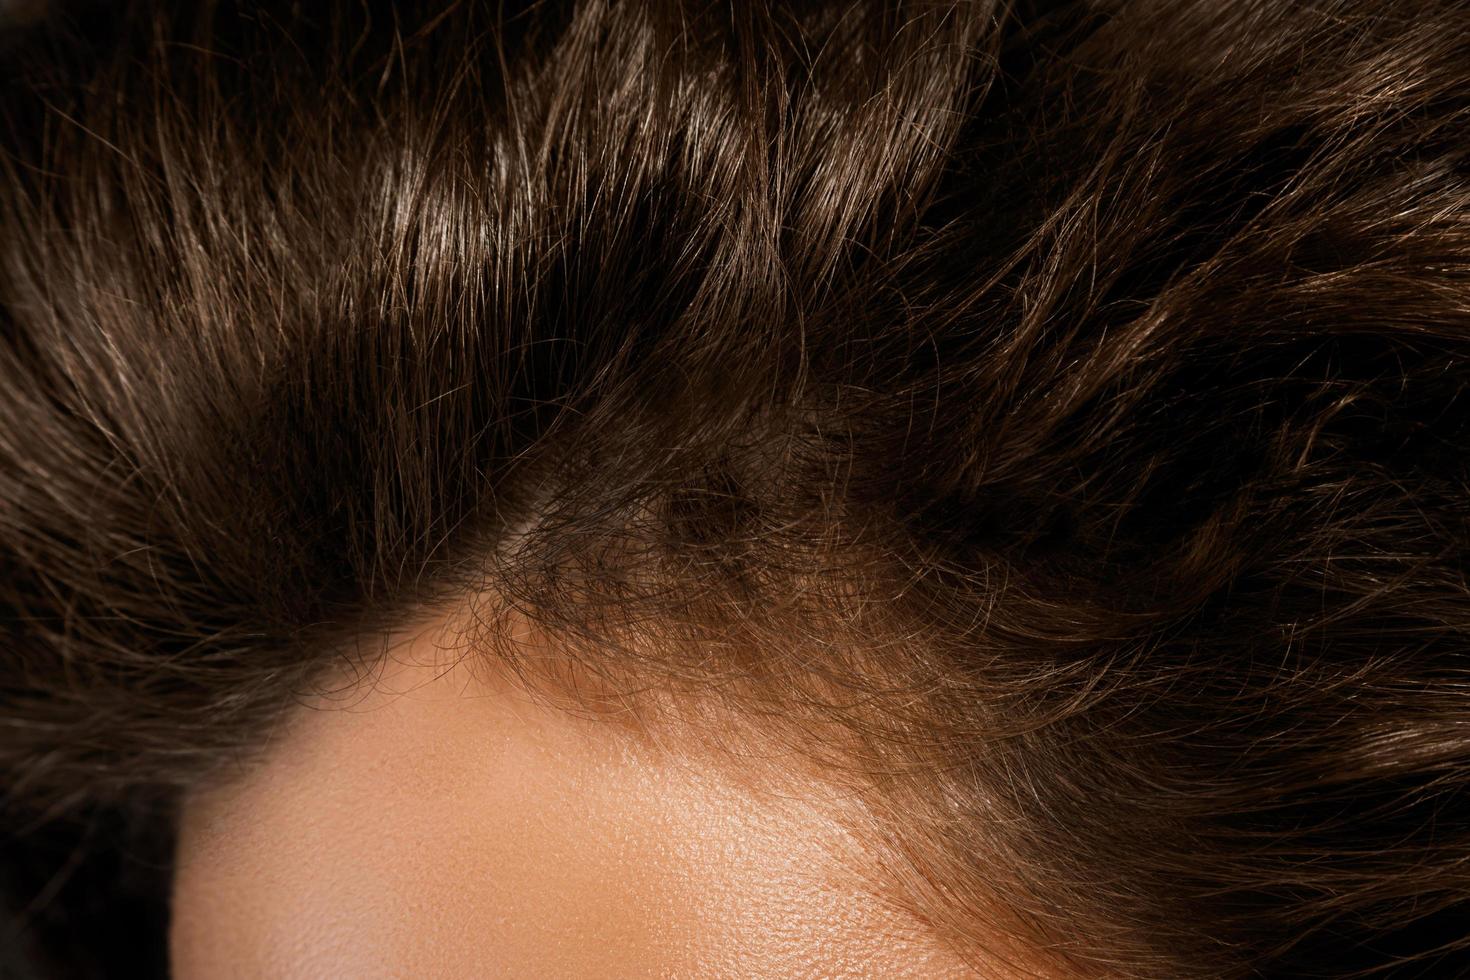 Close up of female healthy hair details photo